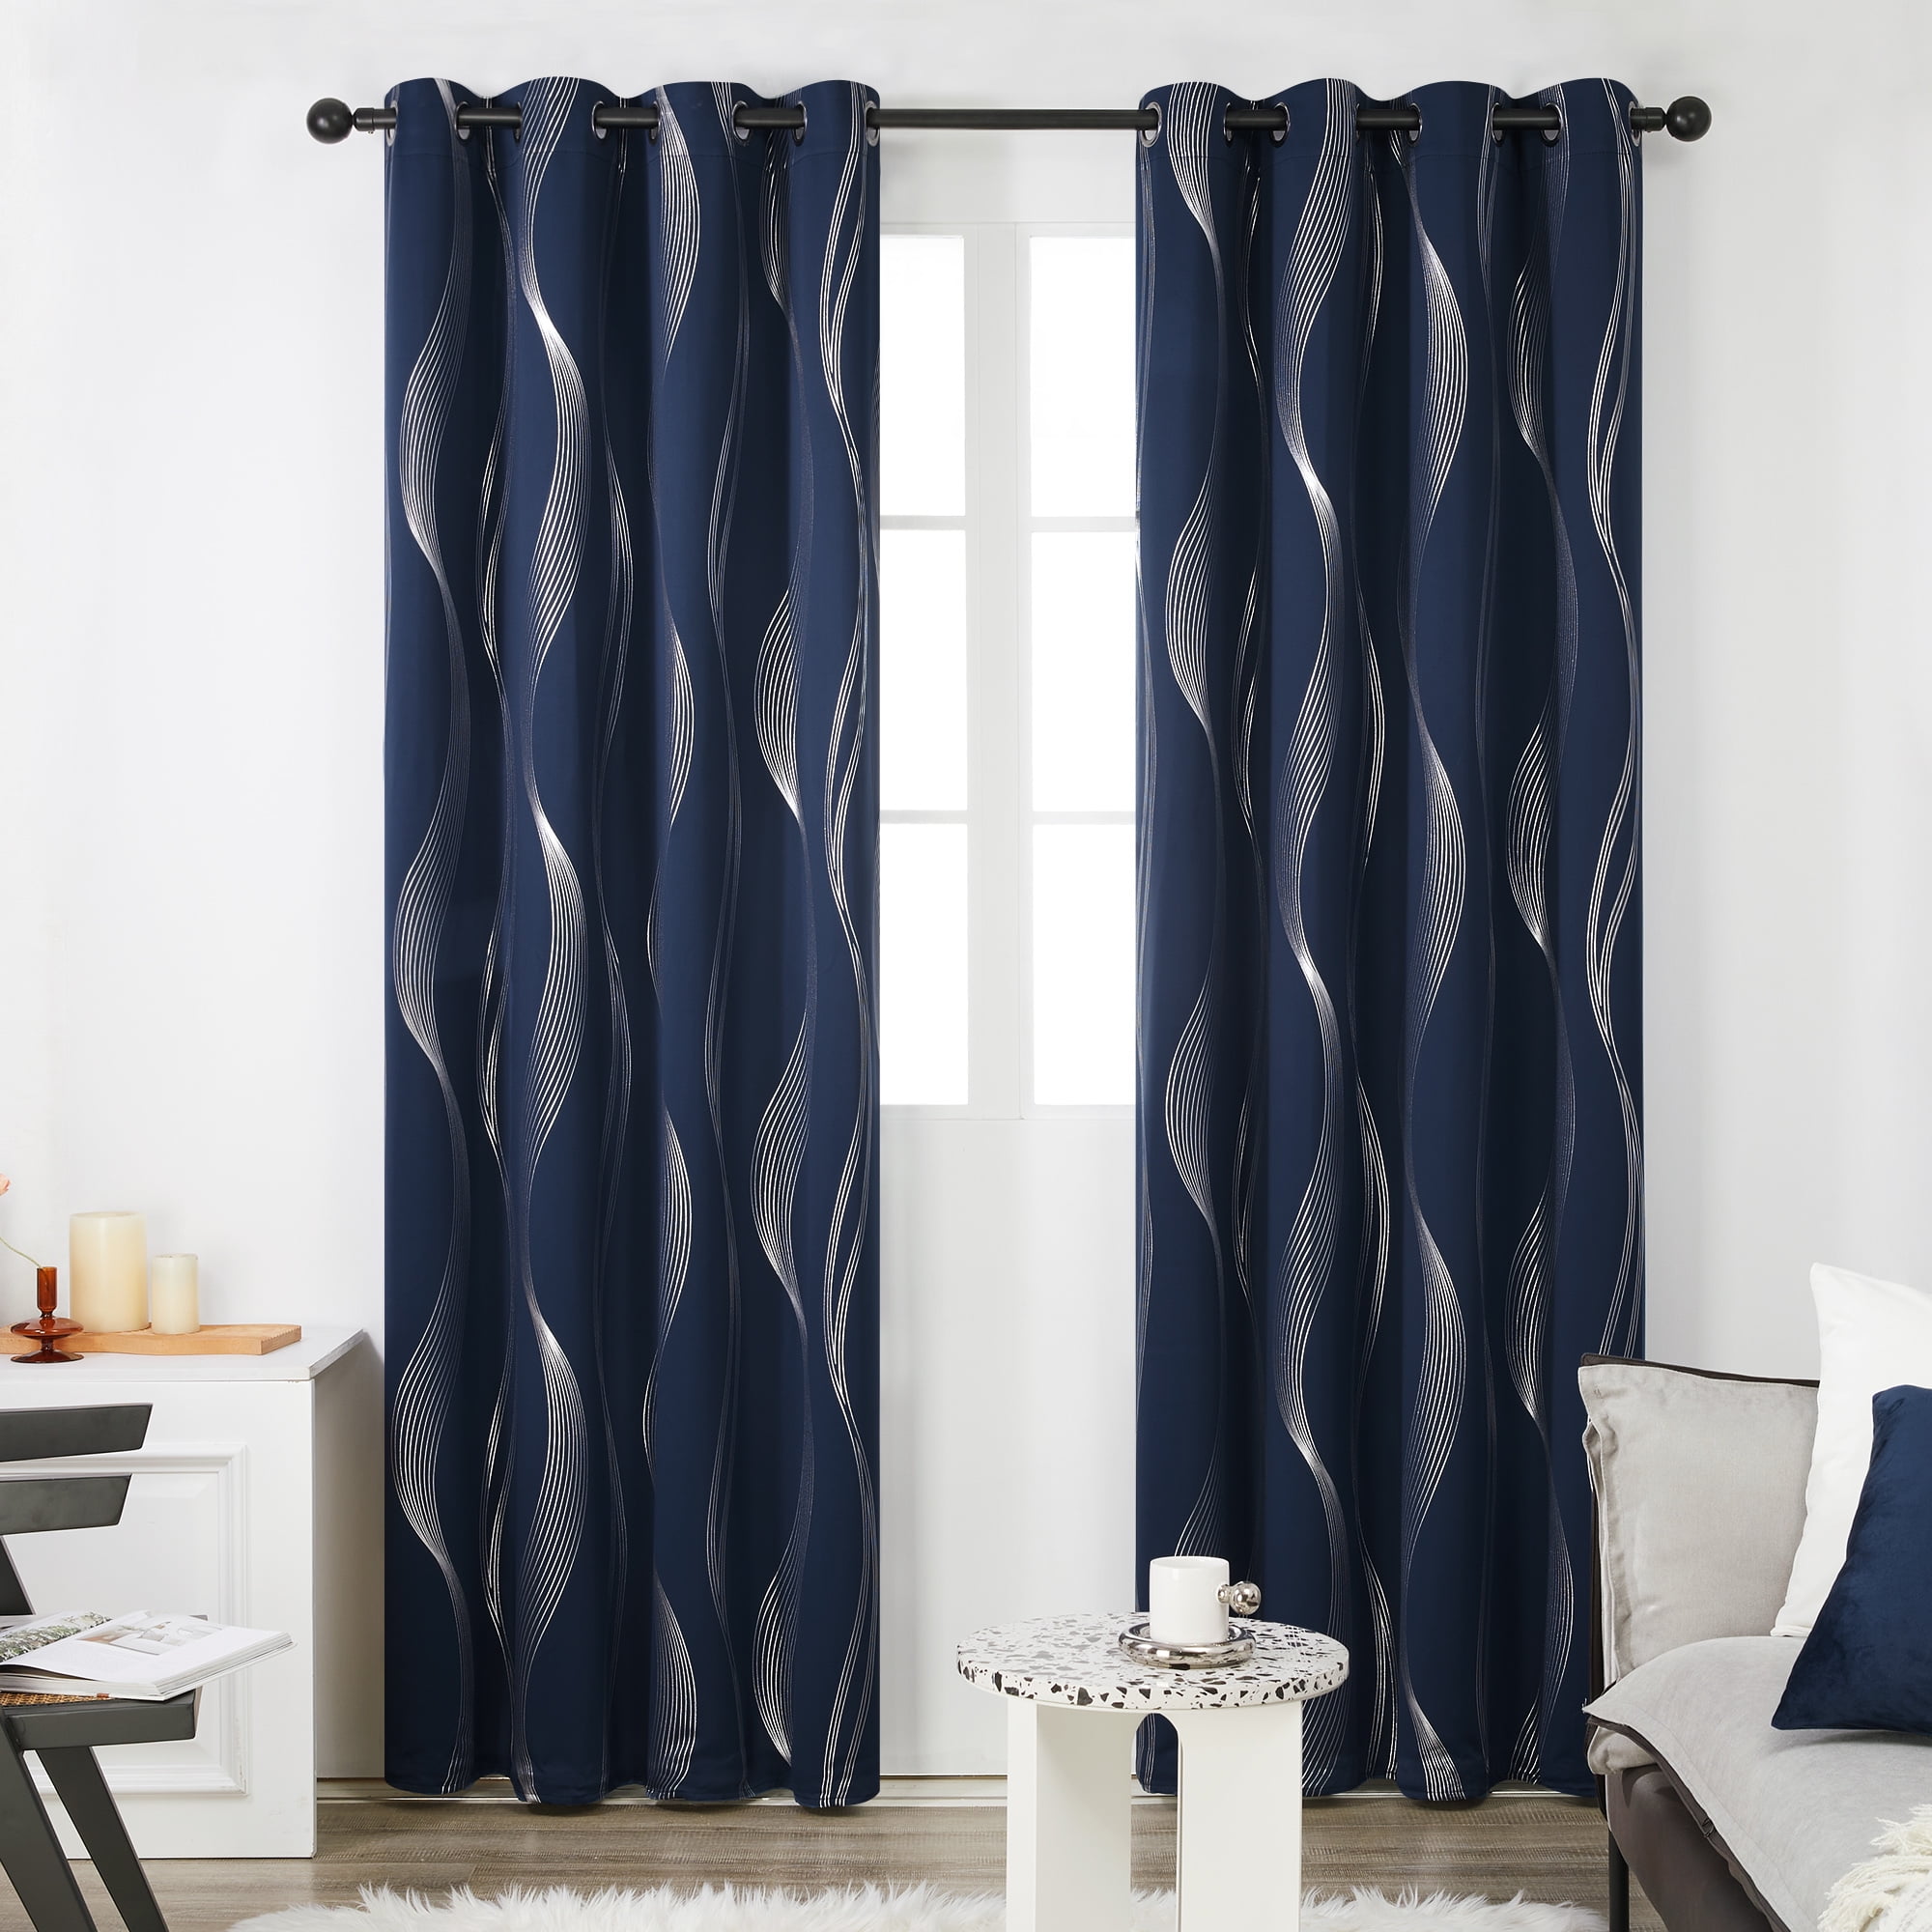 Details about   2 Panels Window Blackout Curtains Geometric Pattern Room Darkening Grey and Navy 